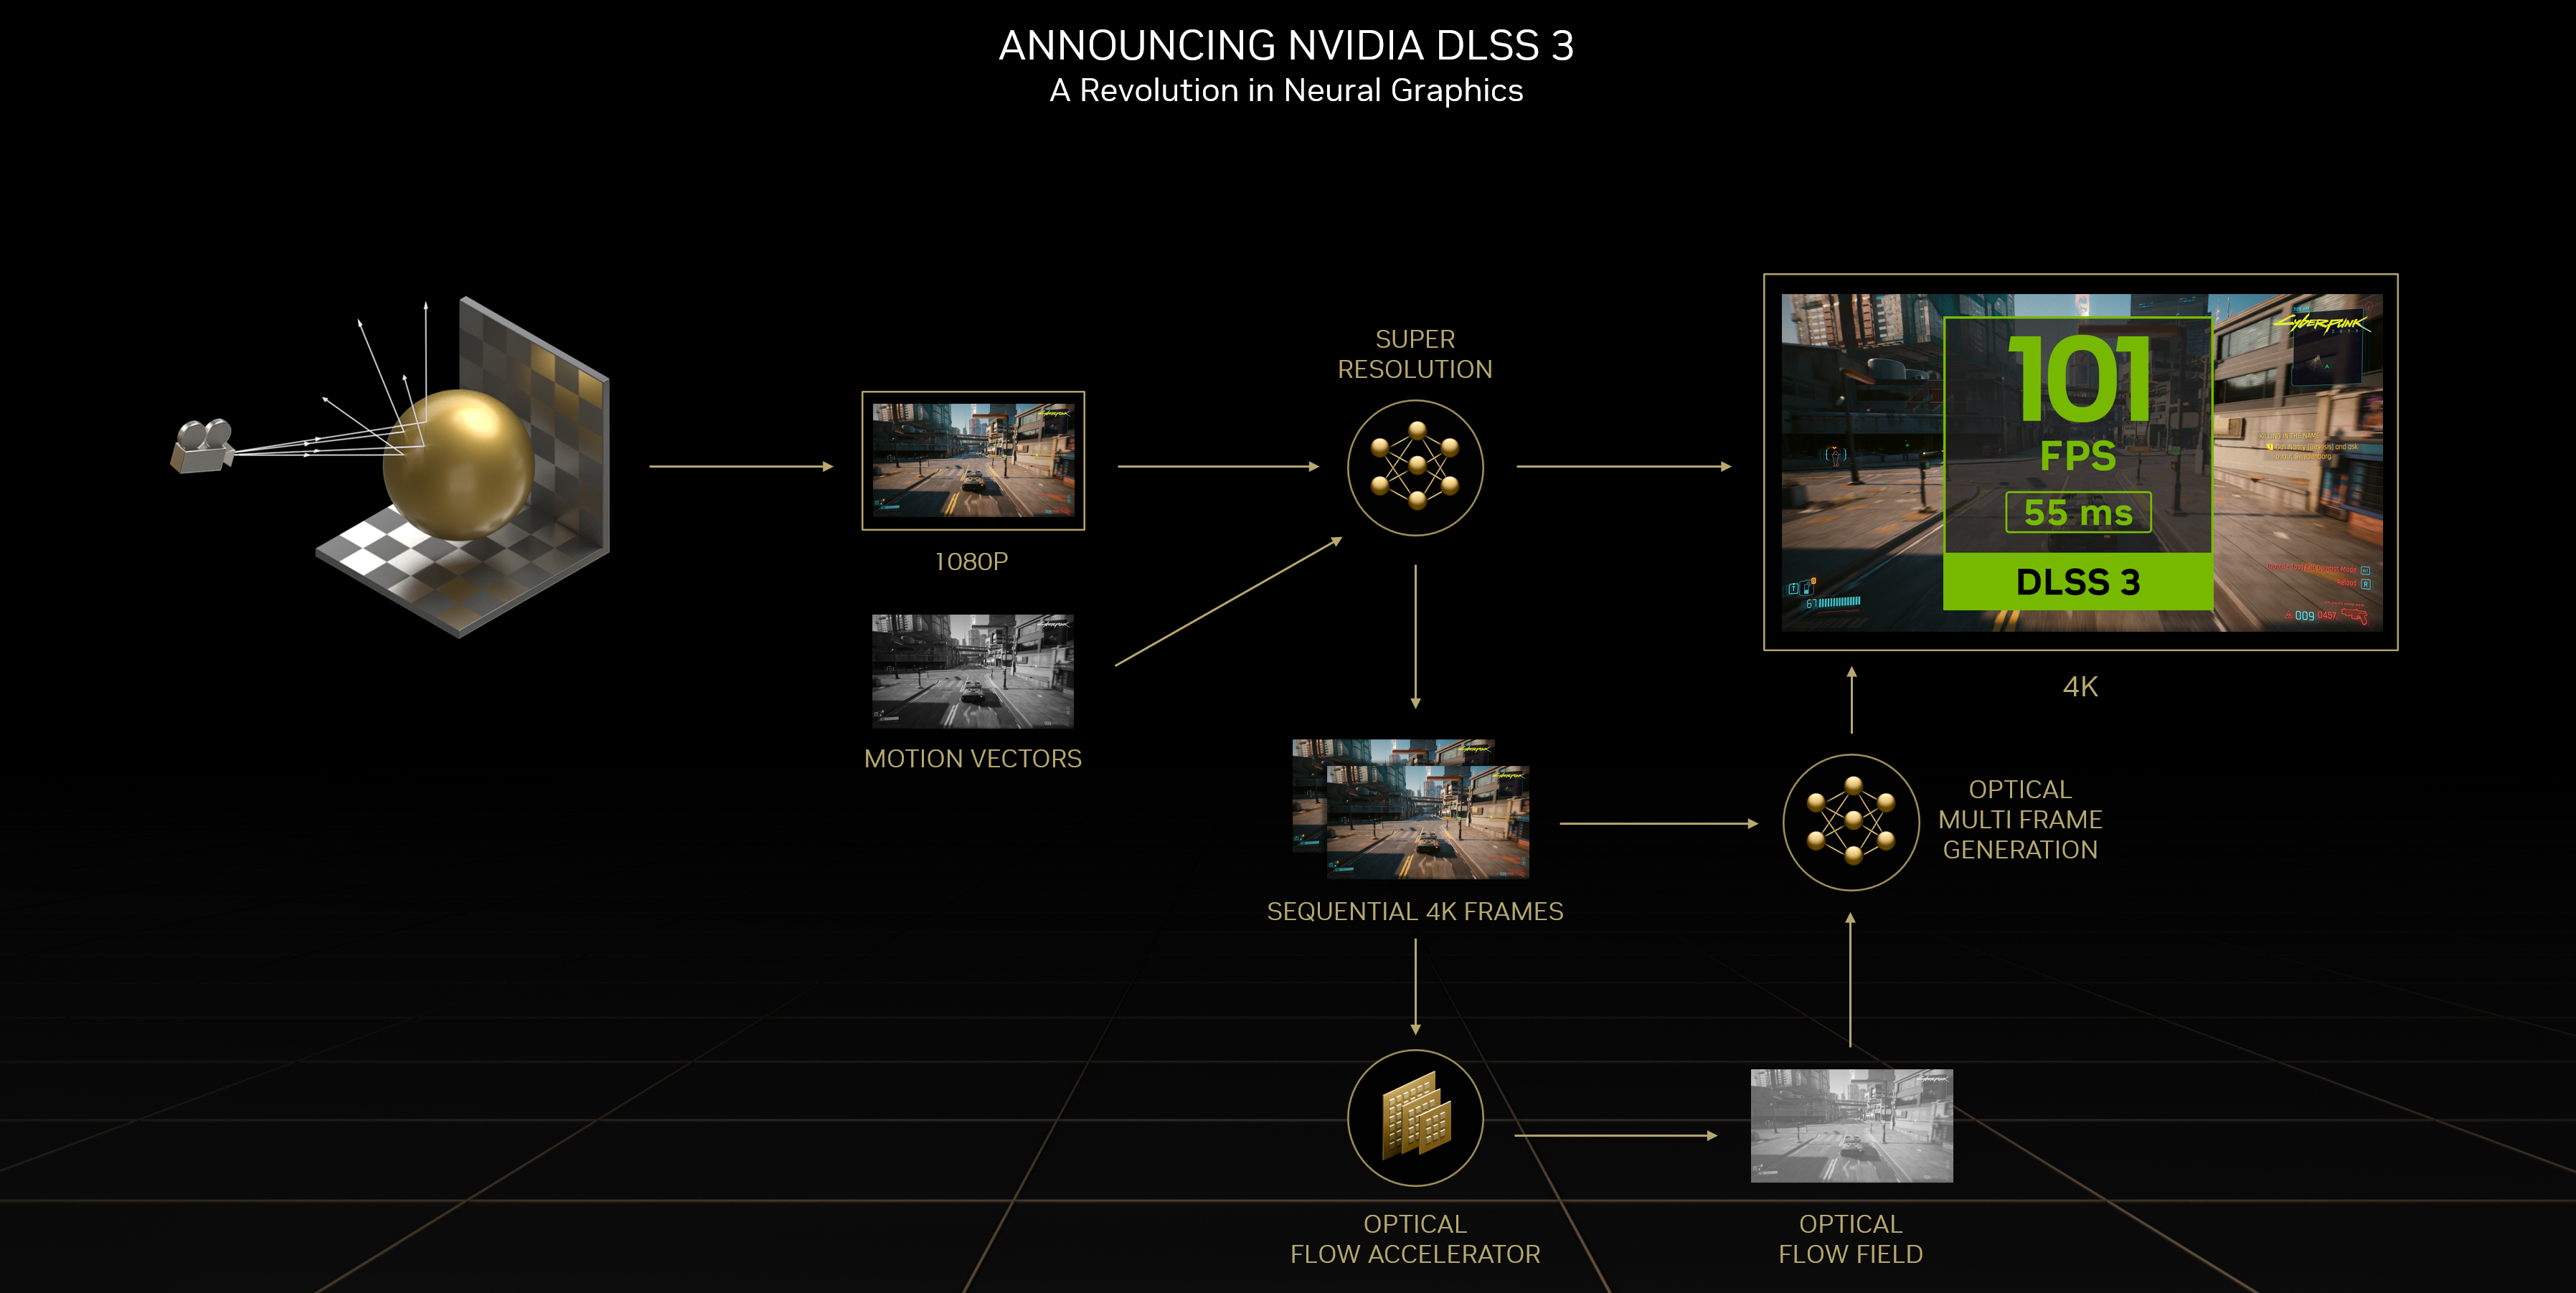 DLSS 3 visualization, (c) by Nvidia